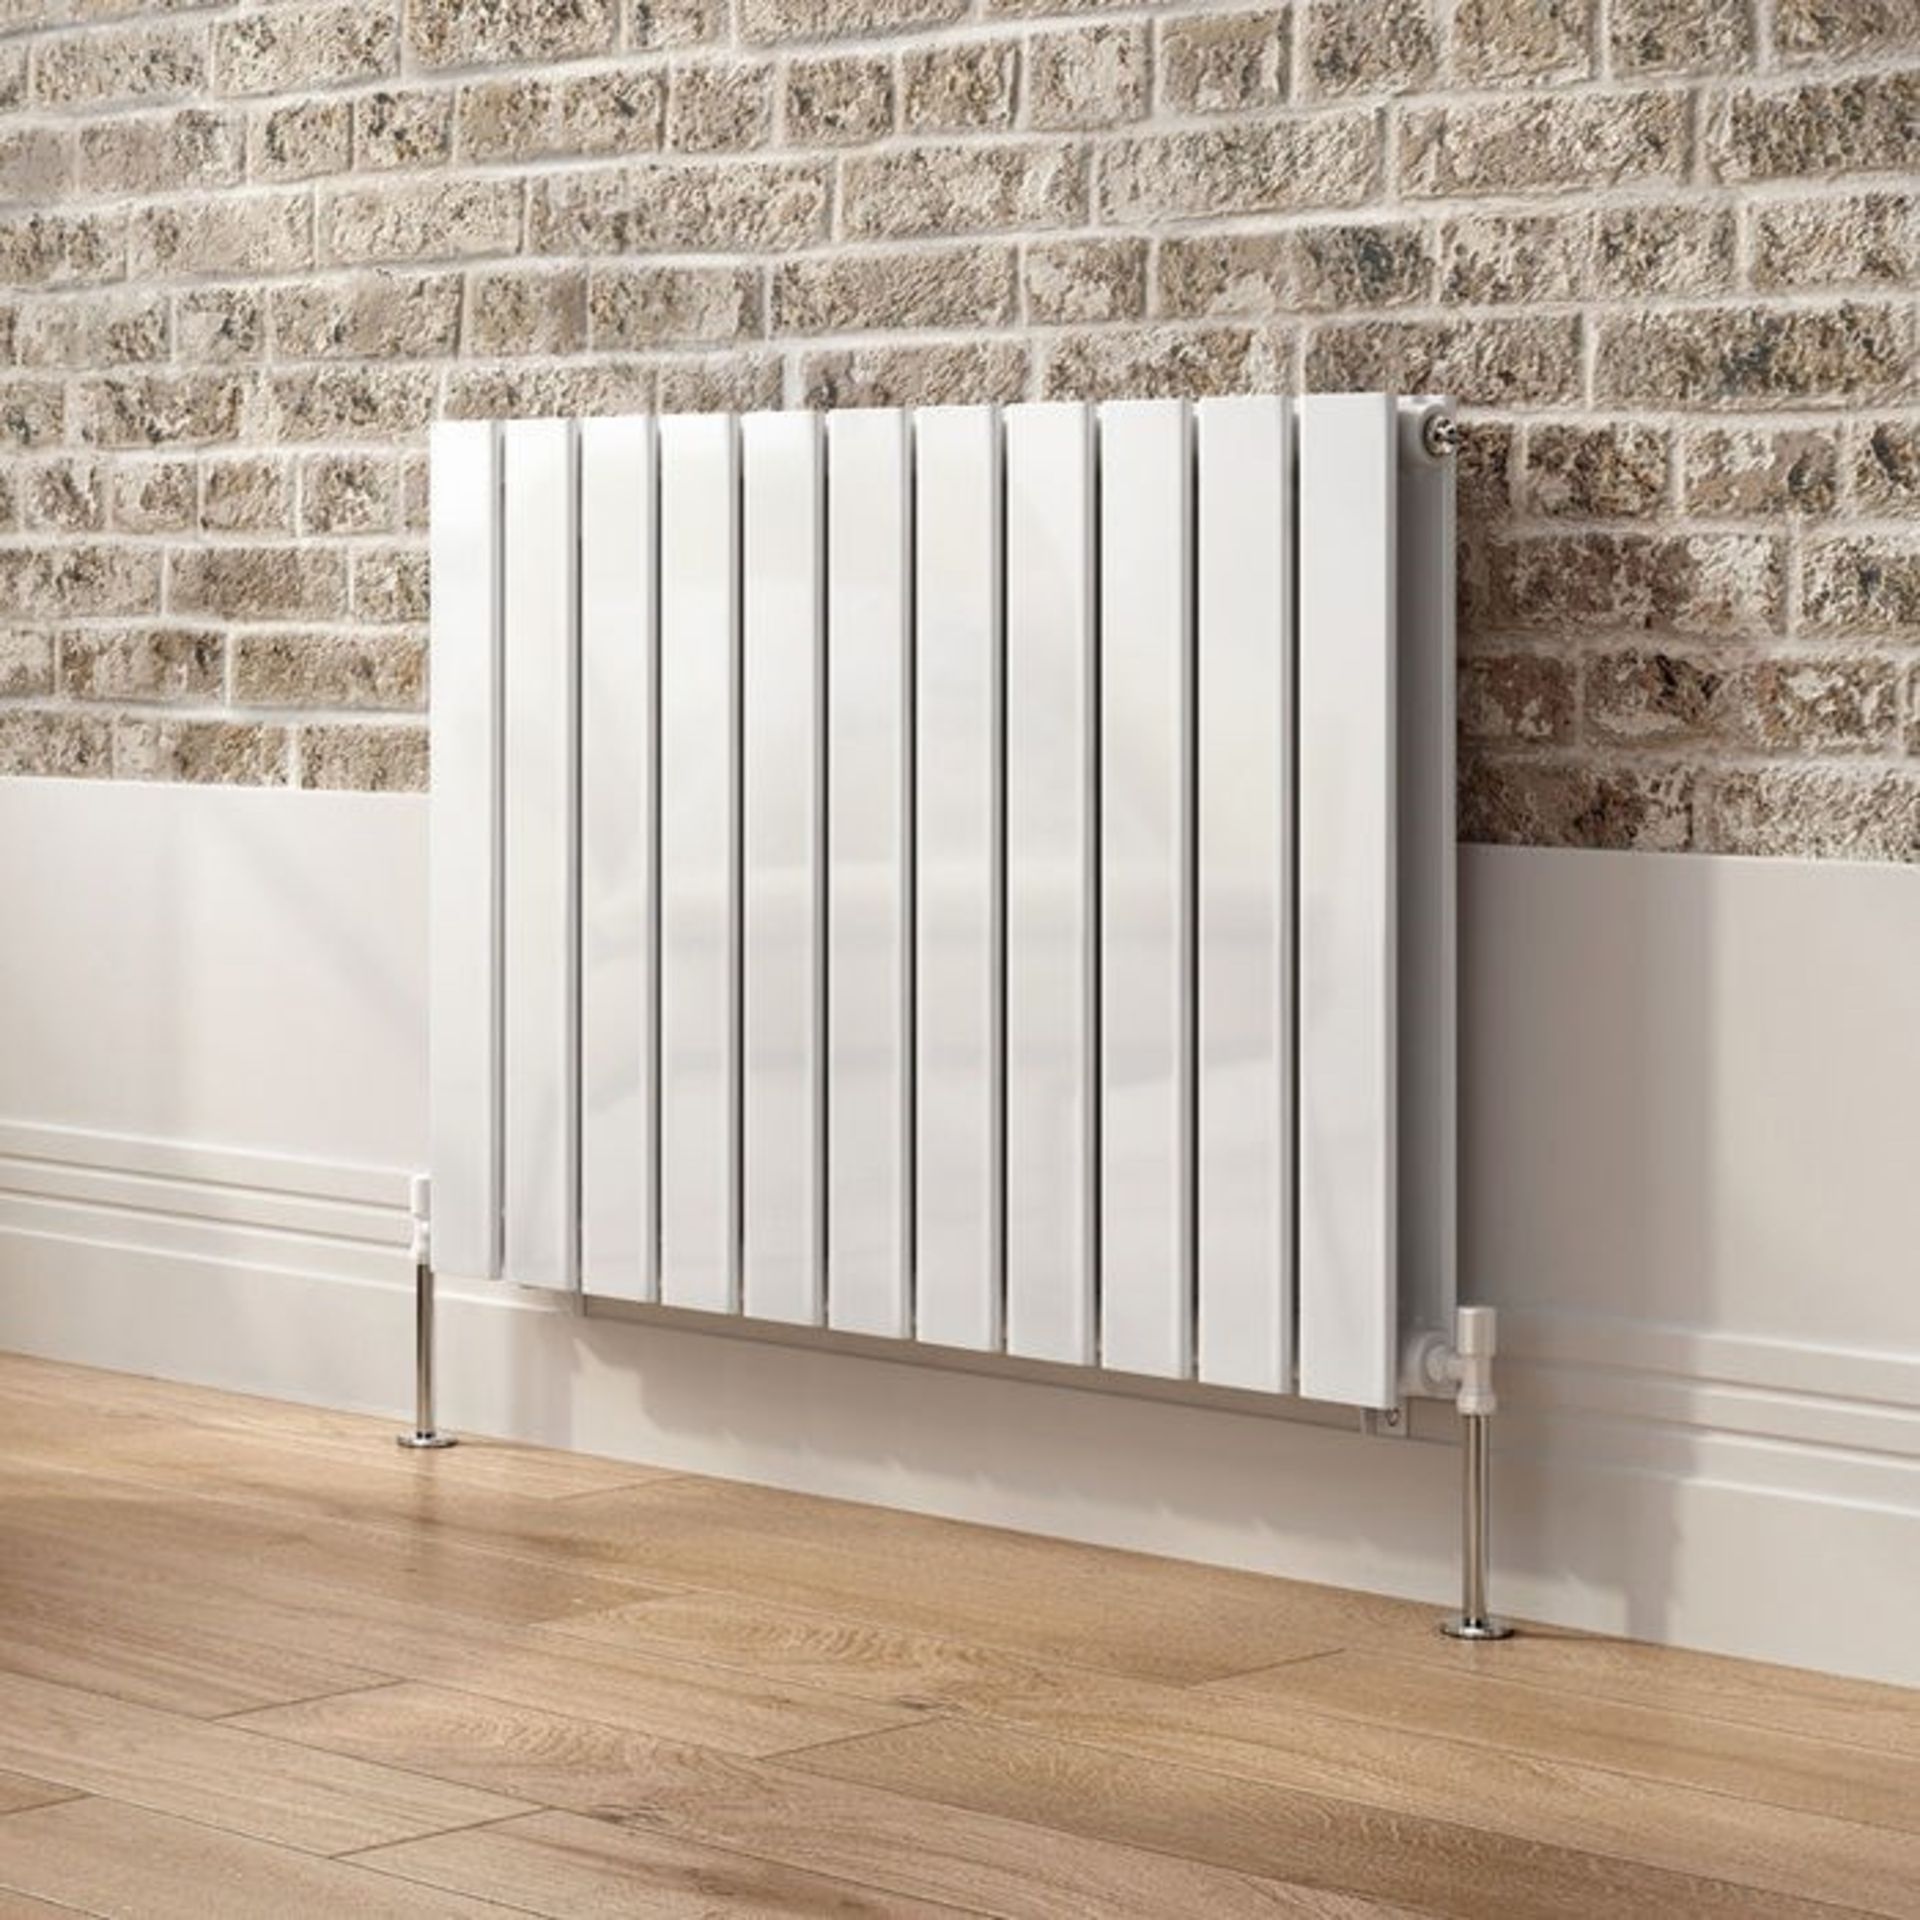 NEW &BOXED 600x830mm Gloss White Double Flat Panel Horizontal Radiator. RRP £474.99. RC221... - Image 2 of 2